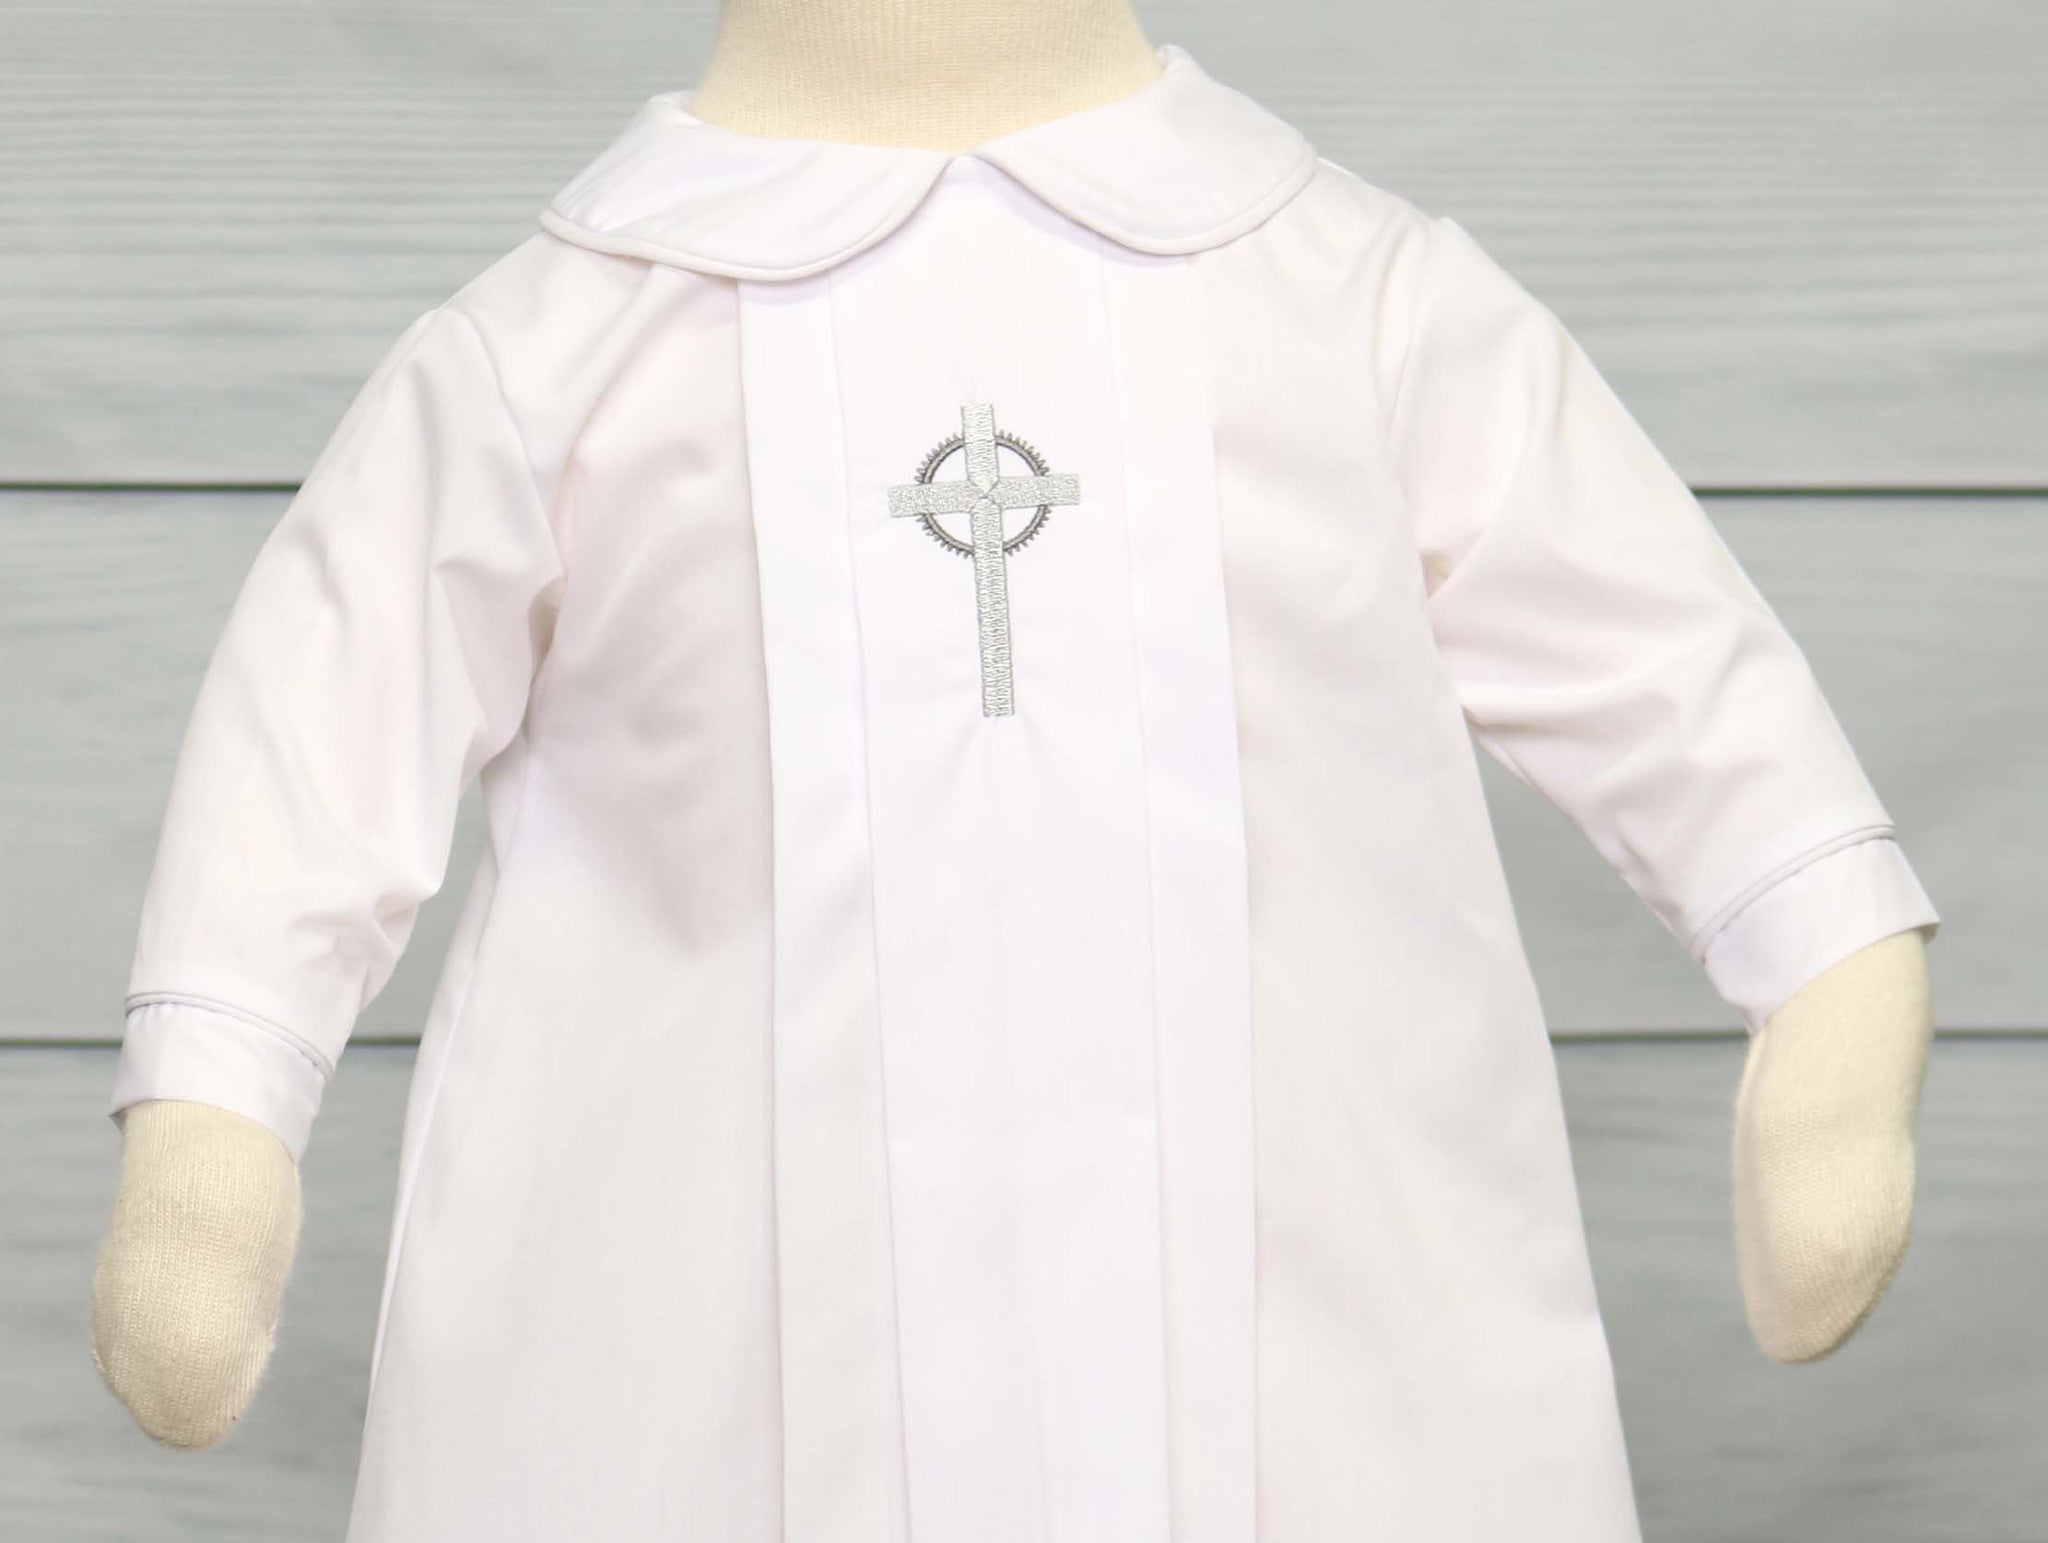 modern christening outfits